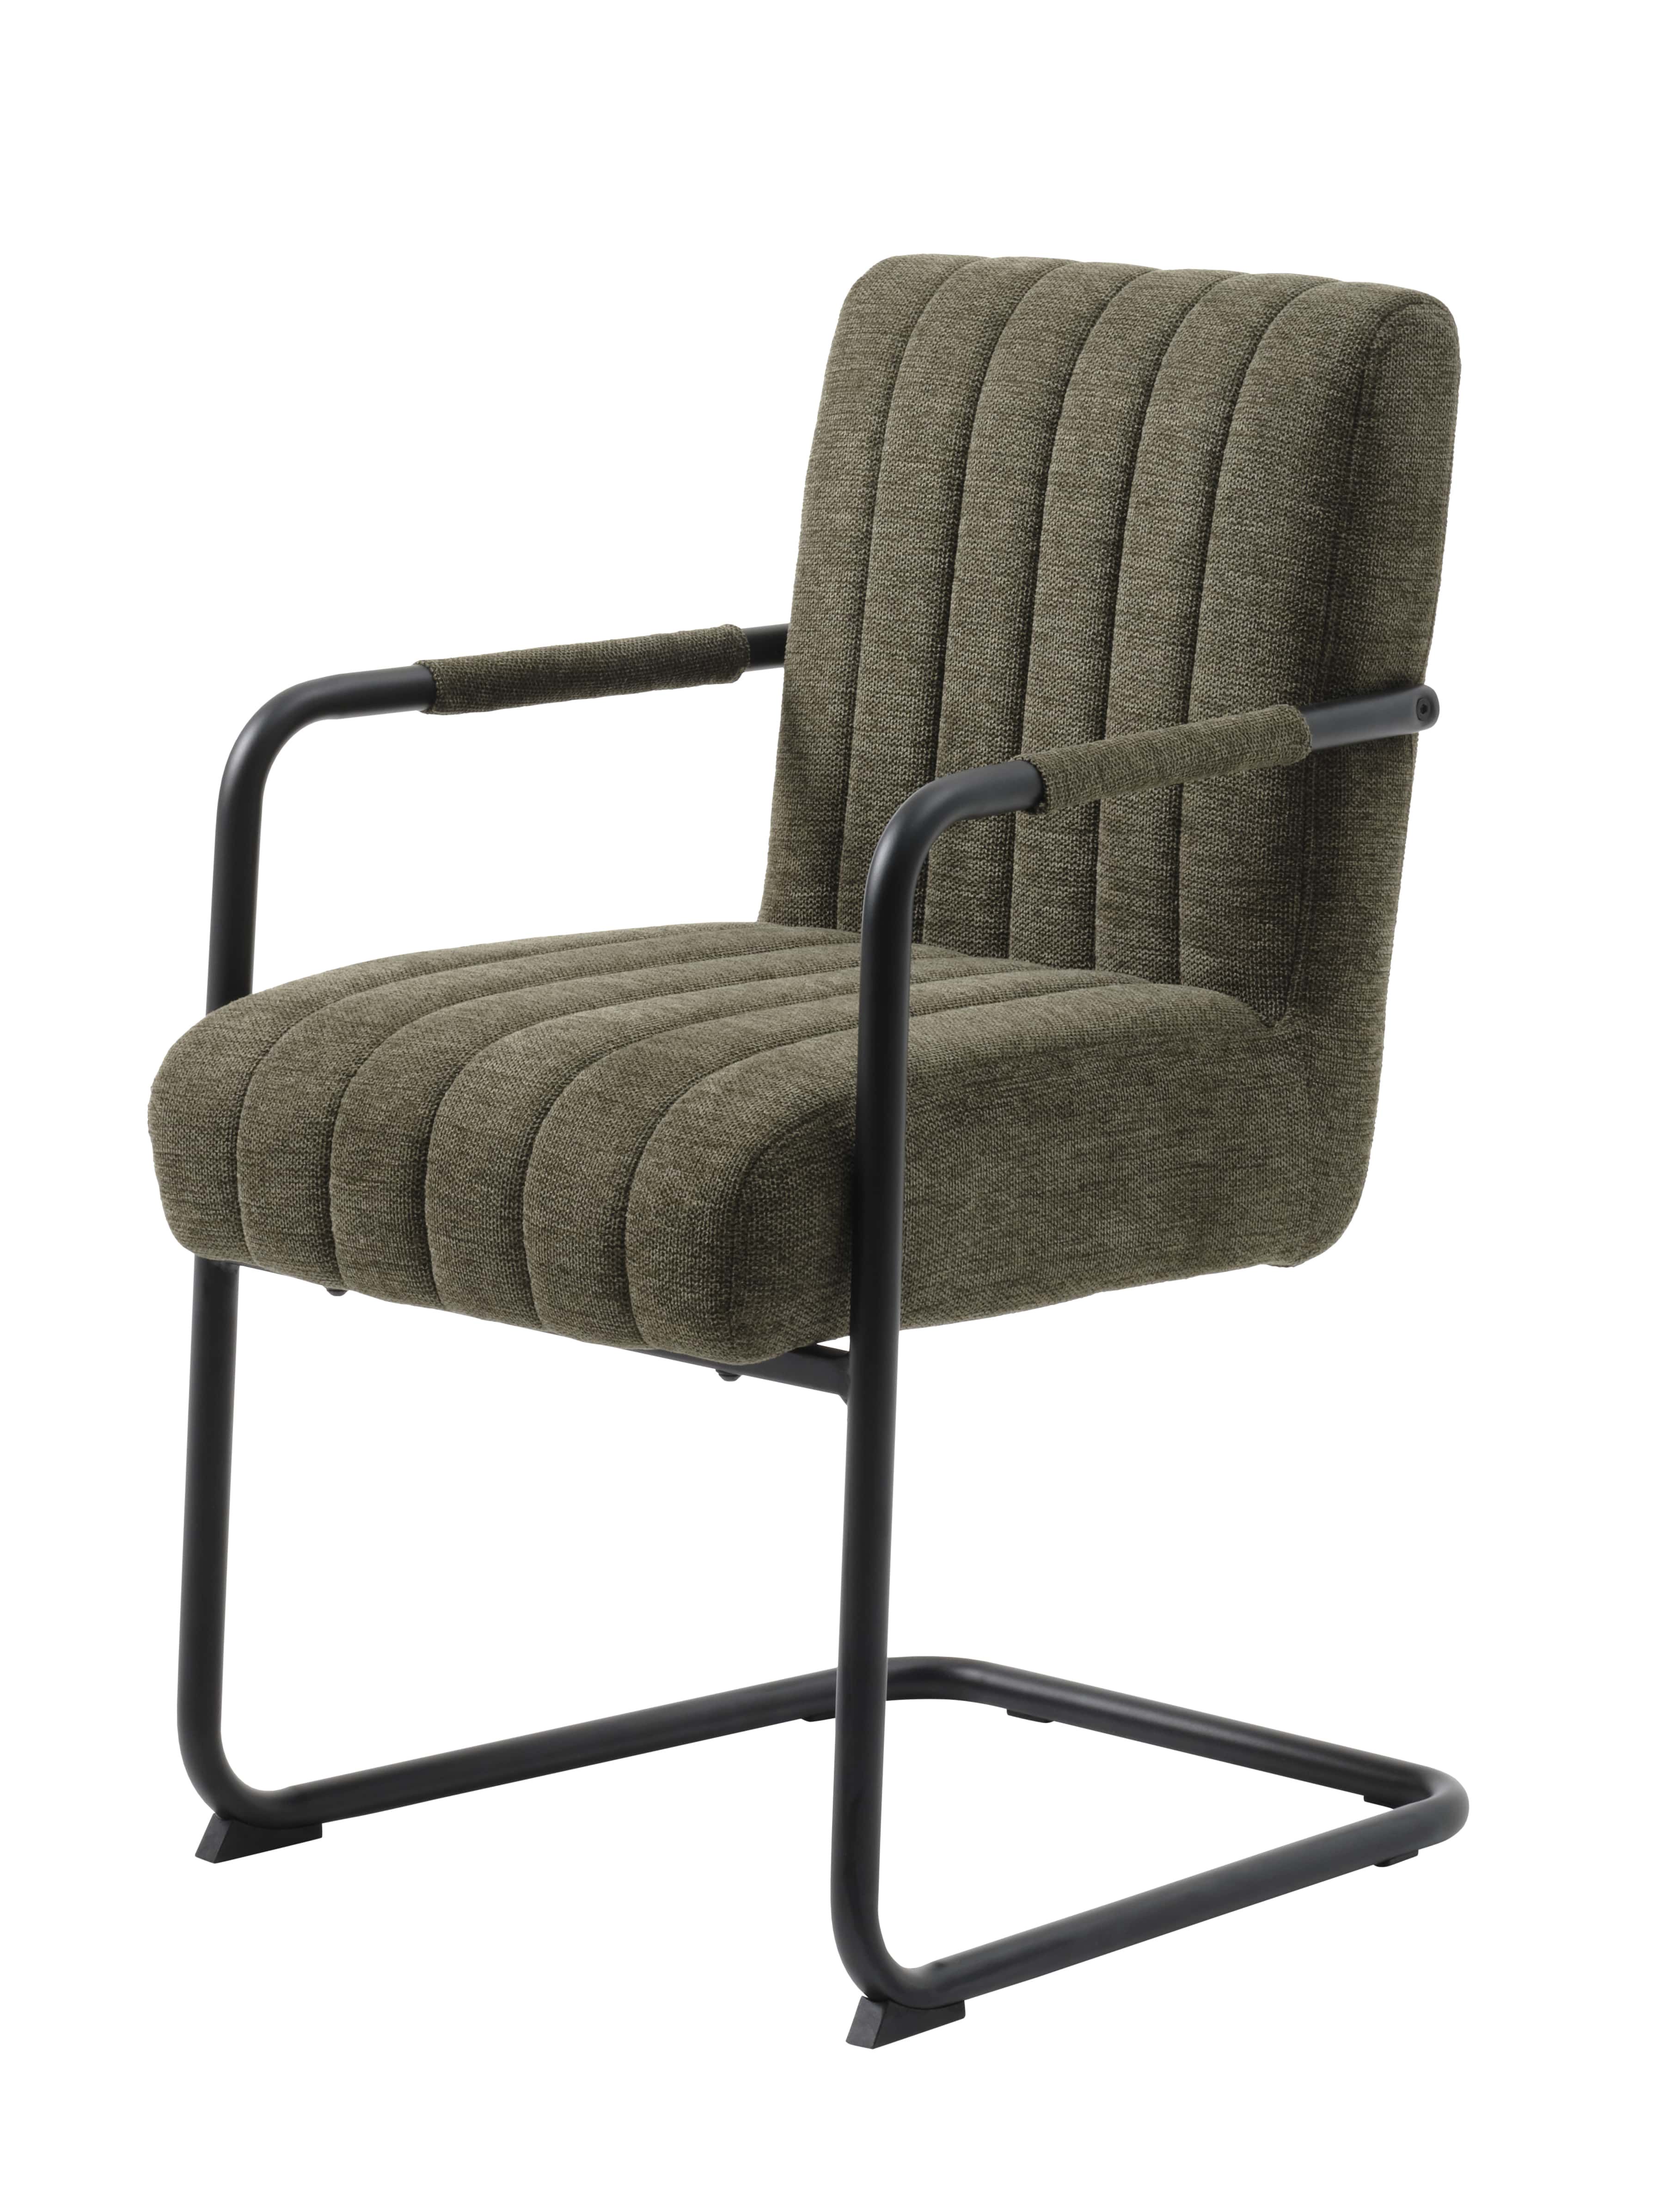 49490003 TROUT CHAIR OLIVE GREEN_1-min.jpg